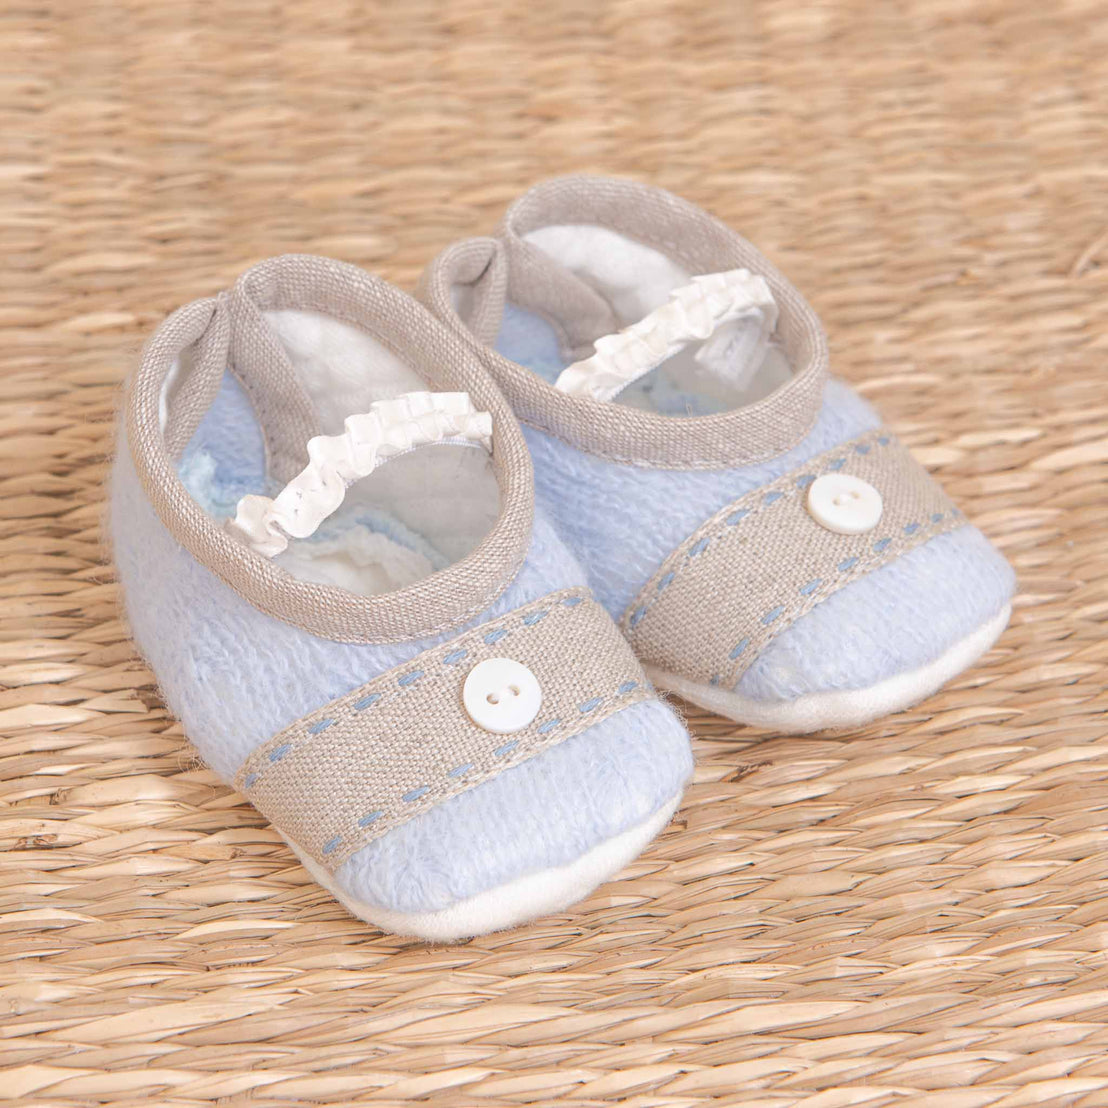 A pair of tiny blue Austin Newborn Gift Set with white ruffled socks on a woven straw background, each shoe features a stylish strap with a white button, perfect for a coming home outfit.